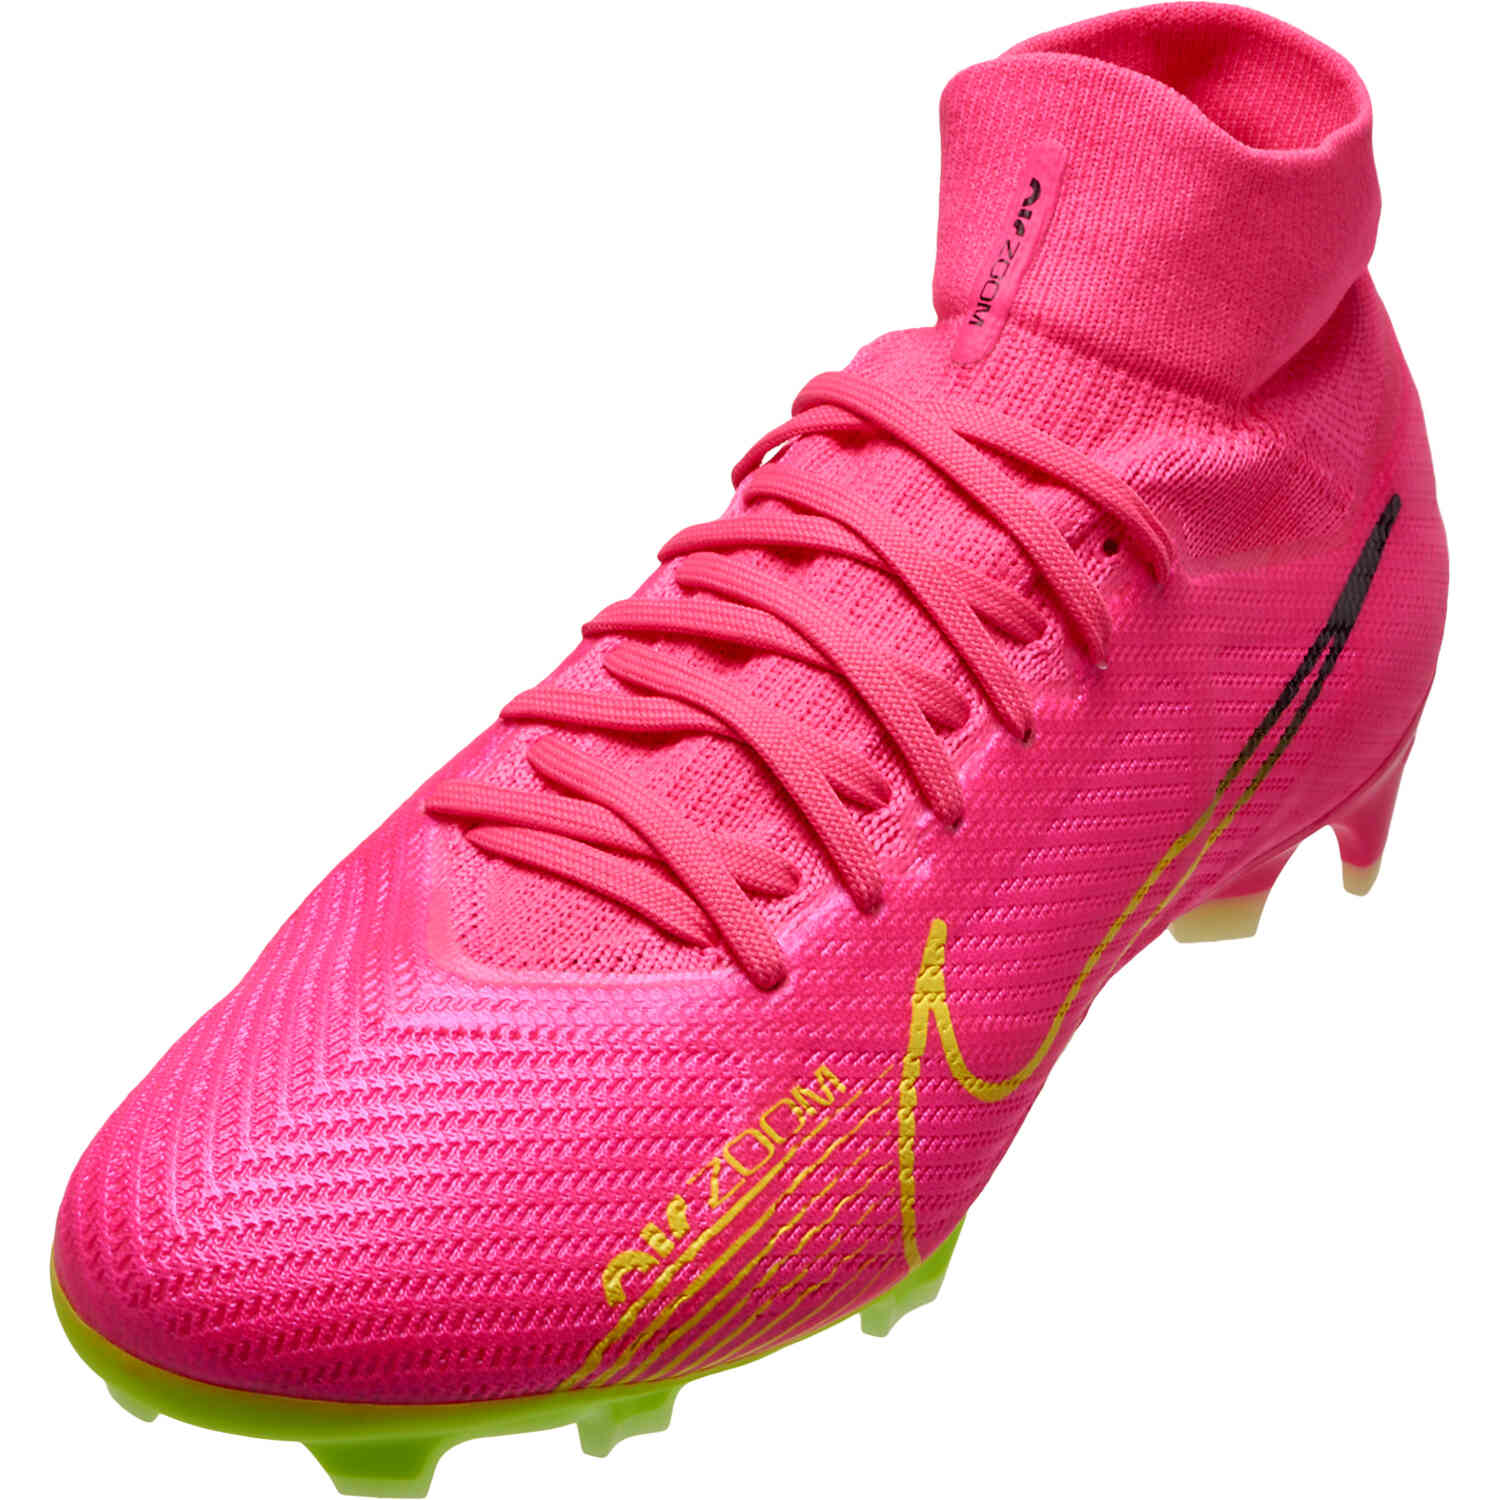 Nike Mercurial Superfly 9 Pro FG Firm Ground Soccer Cleats Pink Blast, Volt & Gridiron - Soccer Master